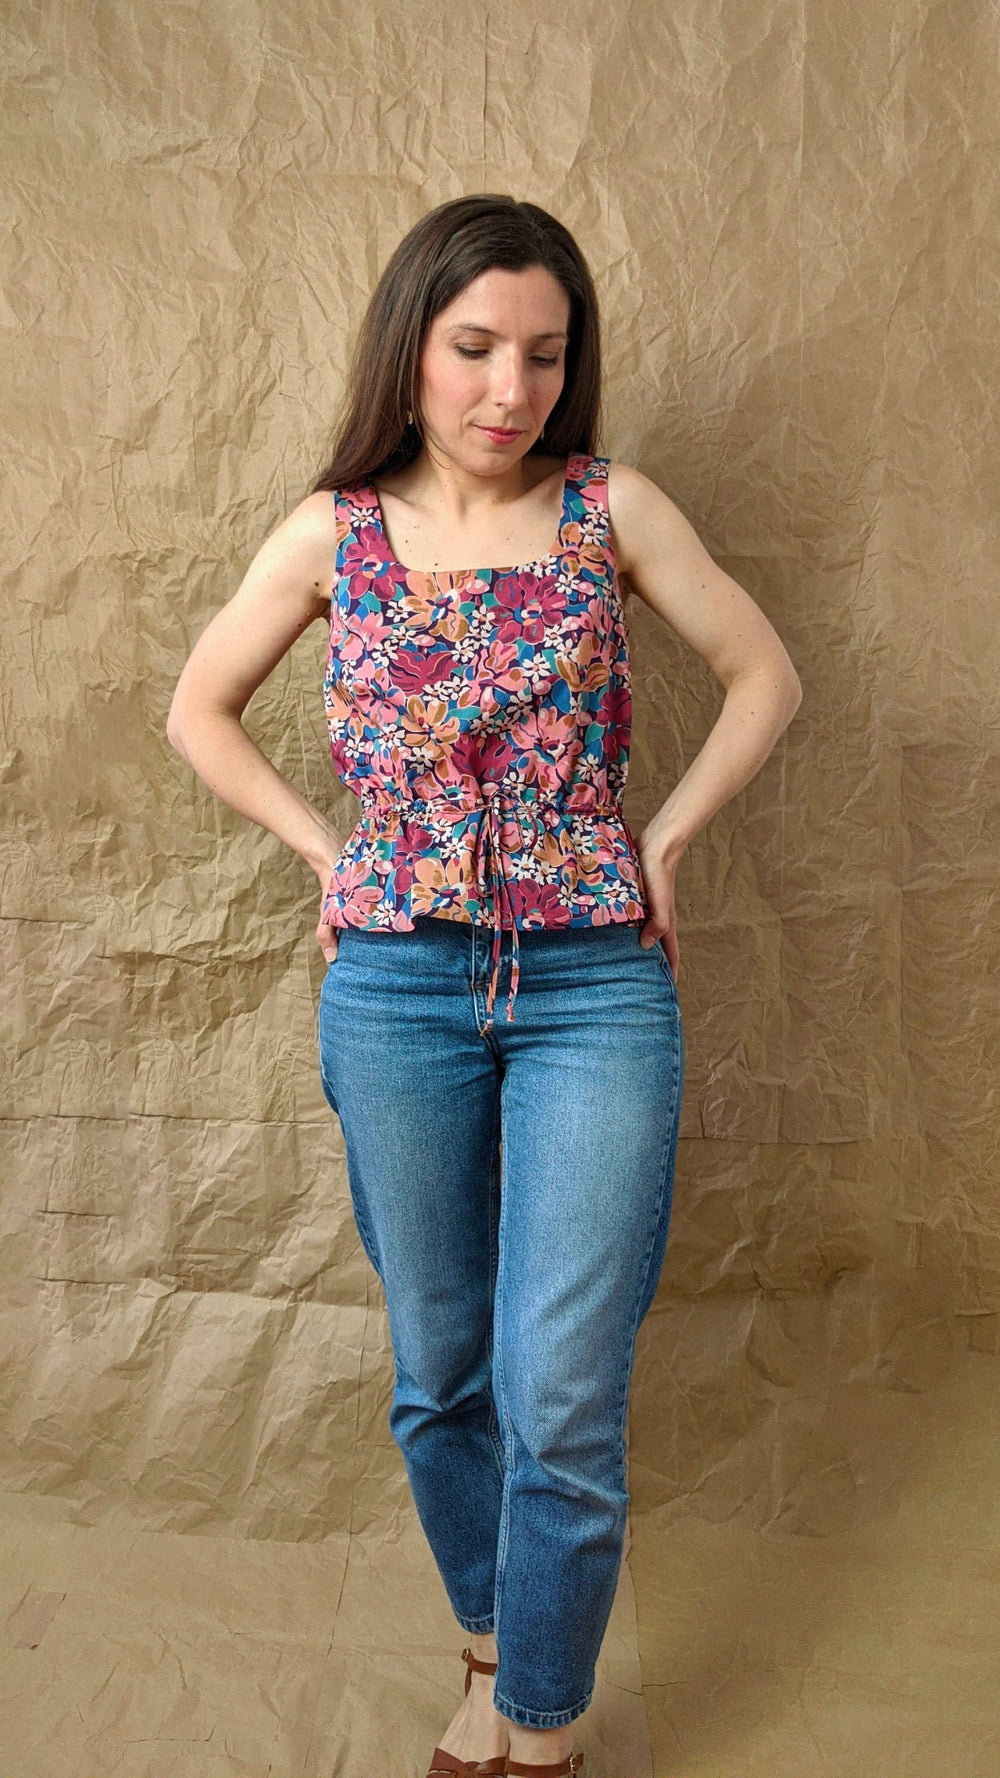 Women wearing the Sable Camisole sewing pattern from Camimade on The Fold Line. A sleeveless top pattern made in cotton, cotton lawn, poplin, linen, viscose, silk, modal fabrics, featuring a square neck, slightly cropped length, cinched waist with channel